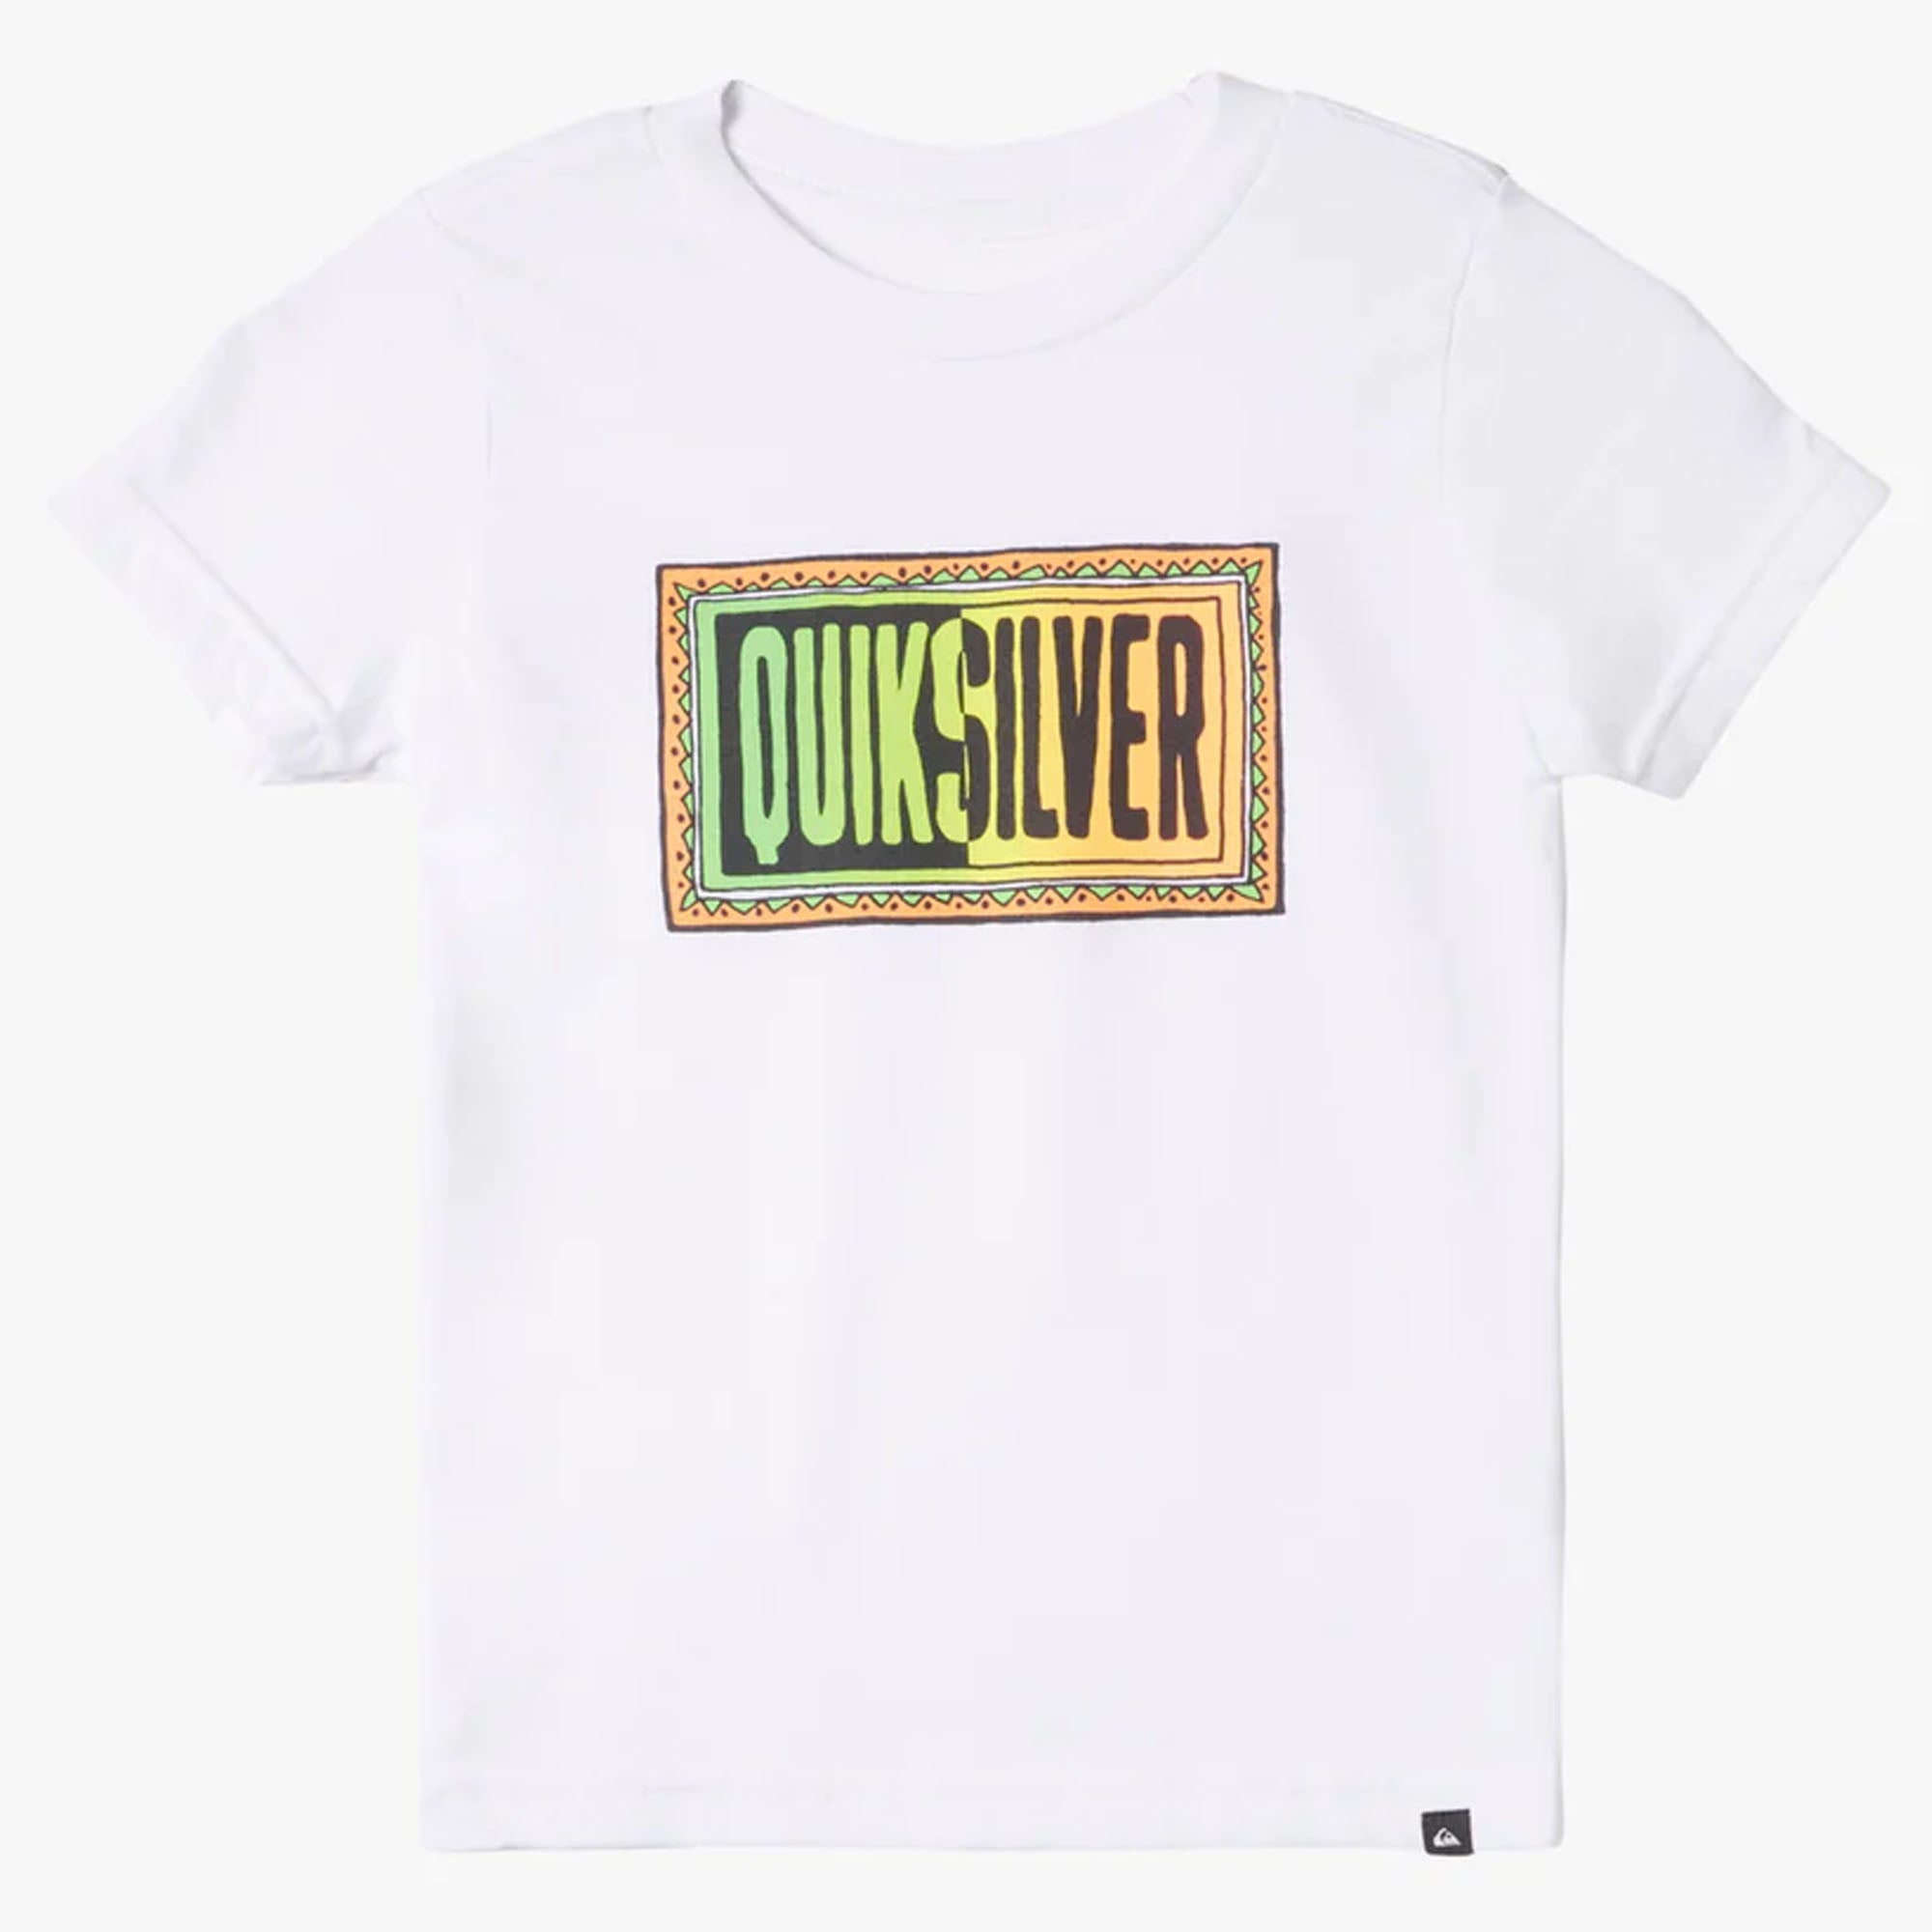 Quiksilver Day Tripper Youth Boy's S/S T-Shirt